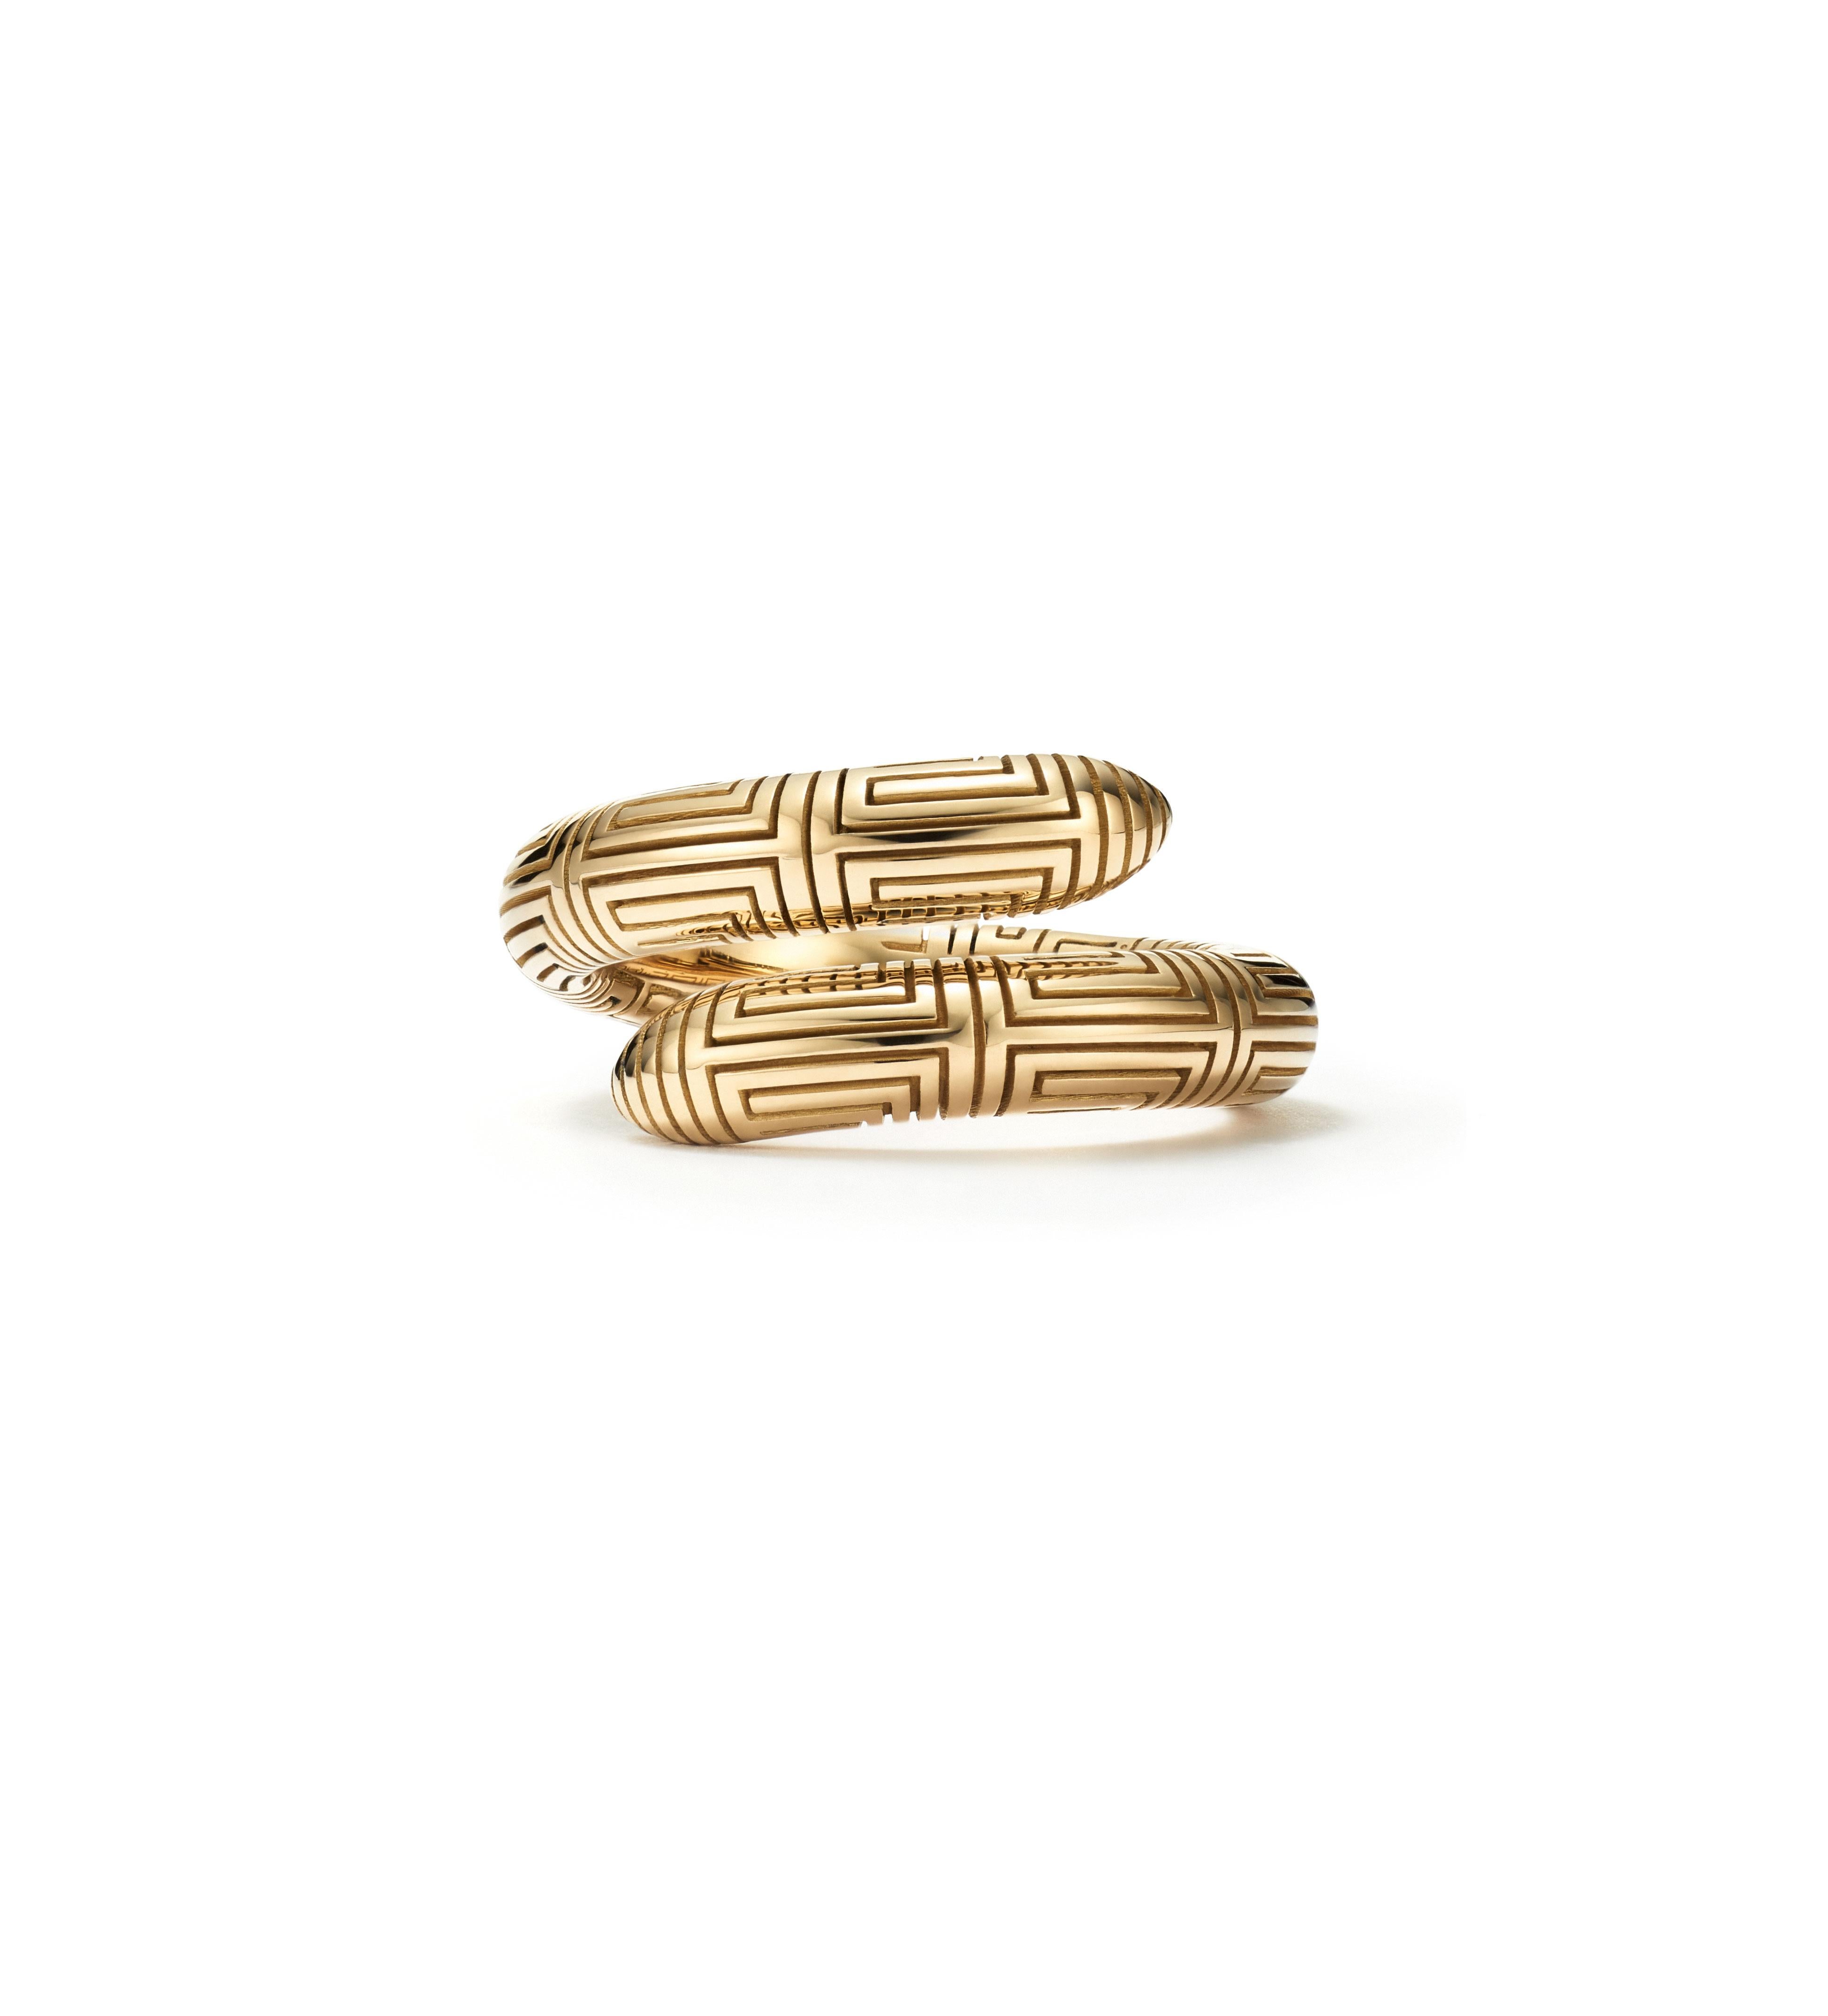 The women and men of Ancient Greece wore this gold spiral ring that is delicately engraved by hand with the Grecian key pattern to represent the symbol of infinity. Wear it today effortlessly with jeans and a t-shirt. 

Handcrafted with 18kt